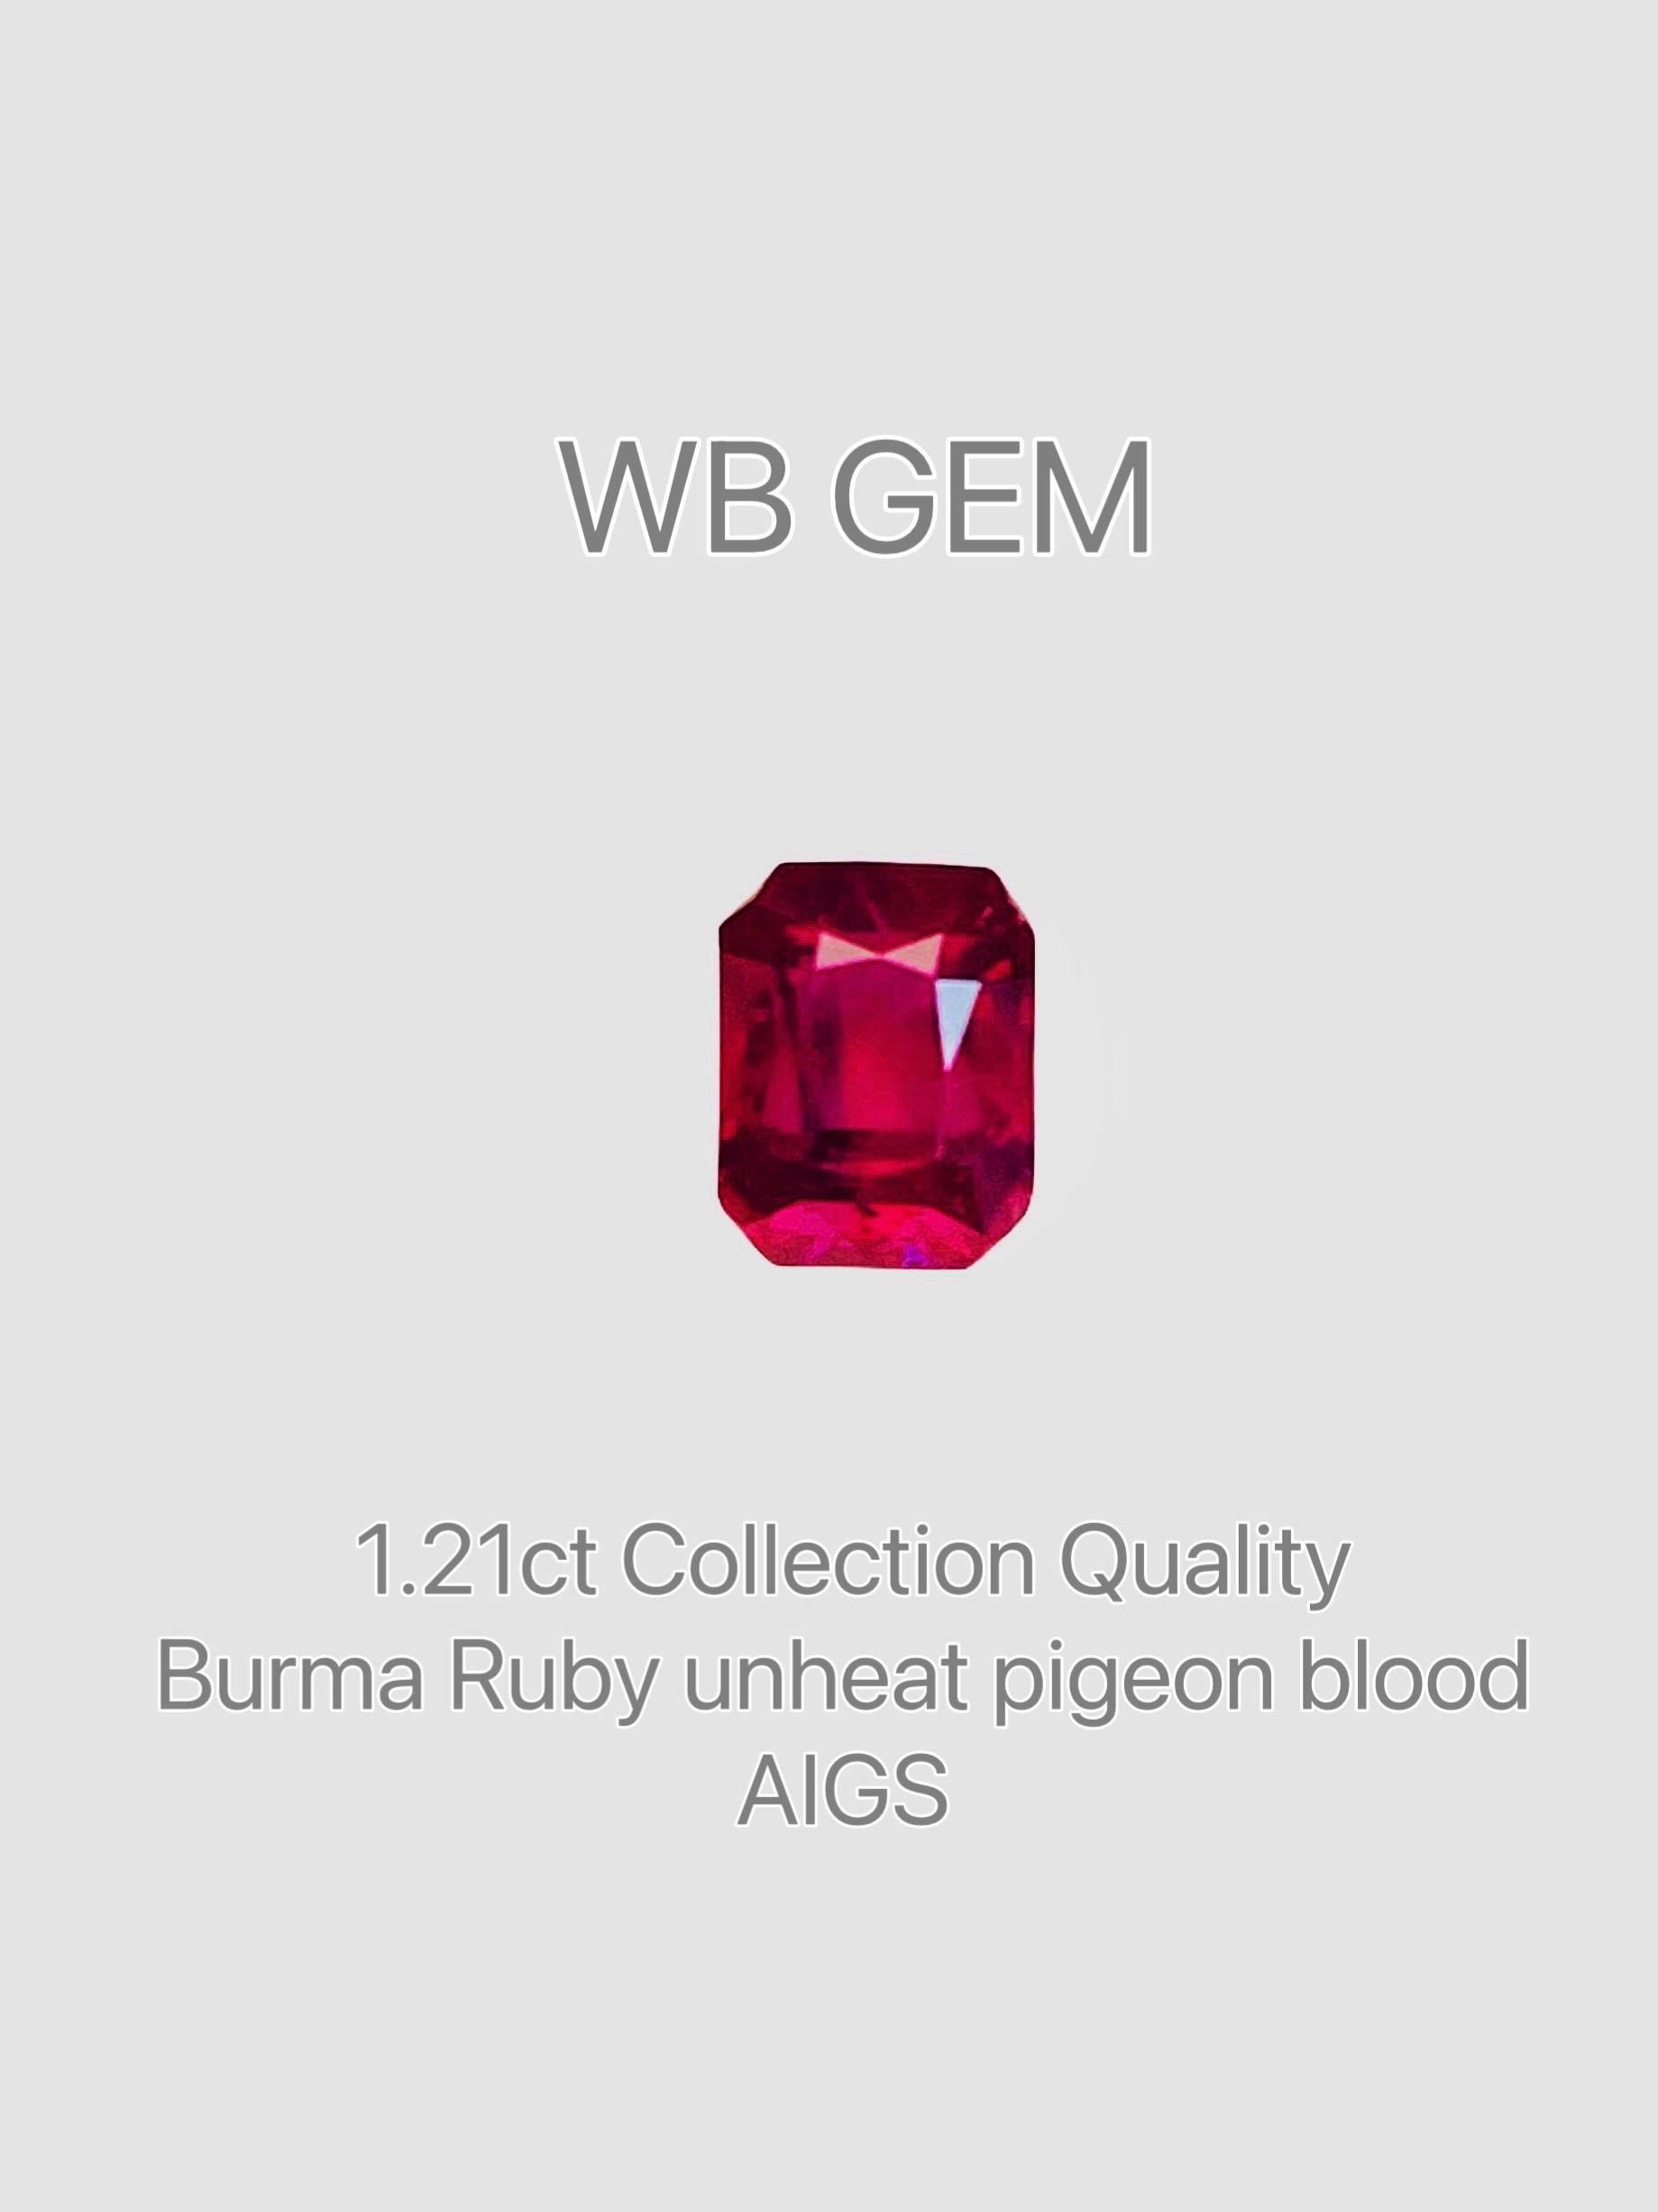 AIGS certificate Unique collection Quality Unheated Ruby burma pigeon blood color 1.21ct full transparent with best luster for ruby eye clean pure beauty crystal 

burma unheated ruby natural
weight : 1.21
origin: Myanmar (burma) 
color: pigeon